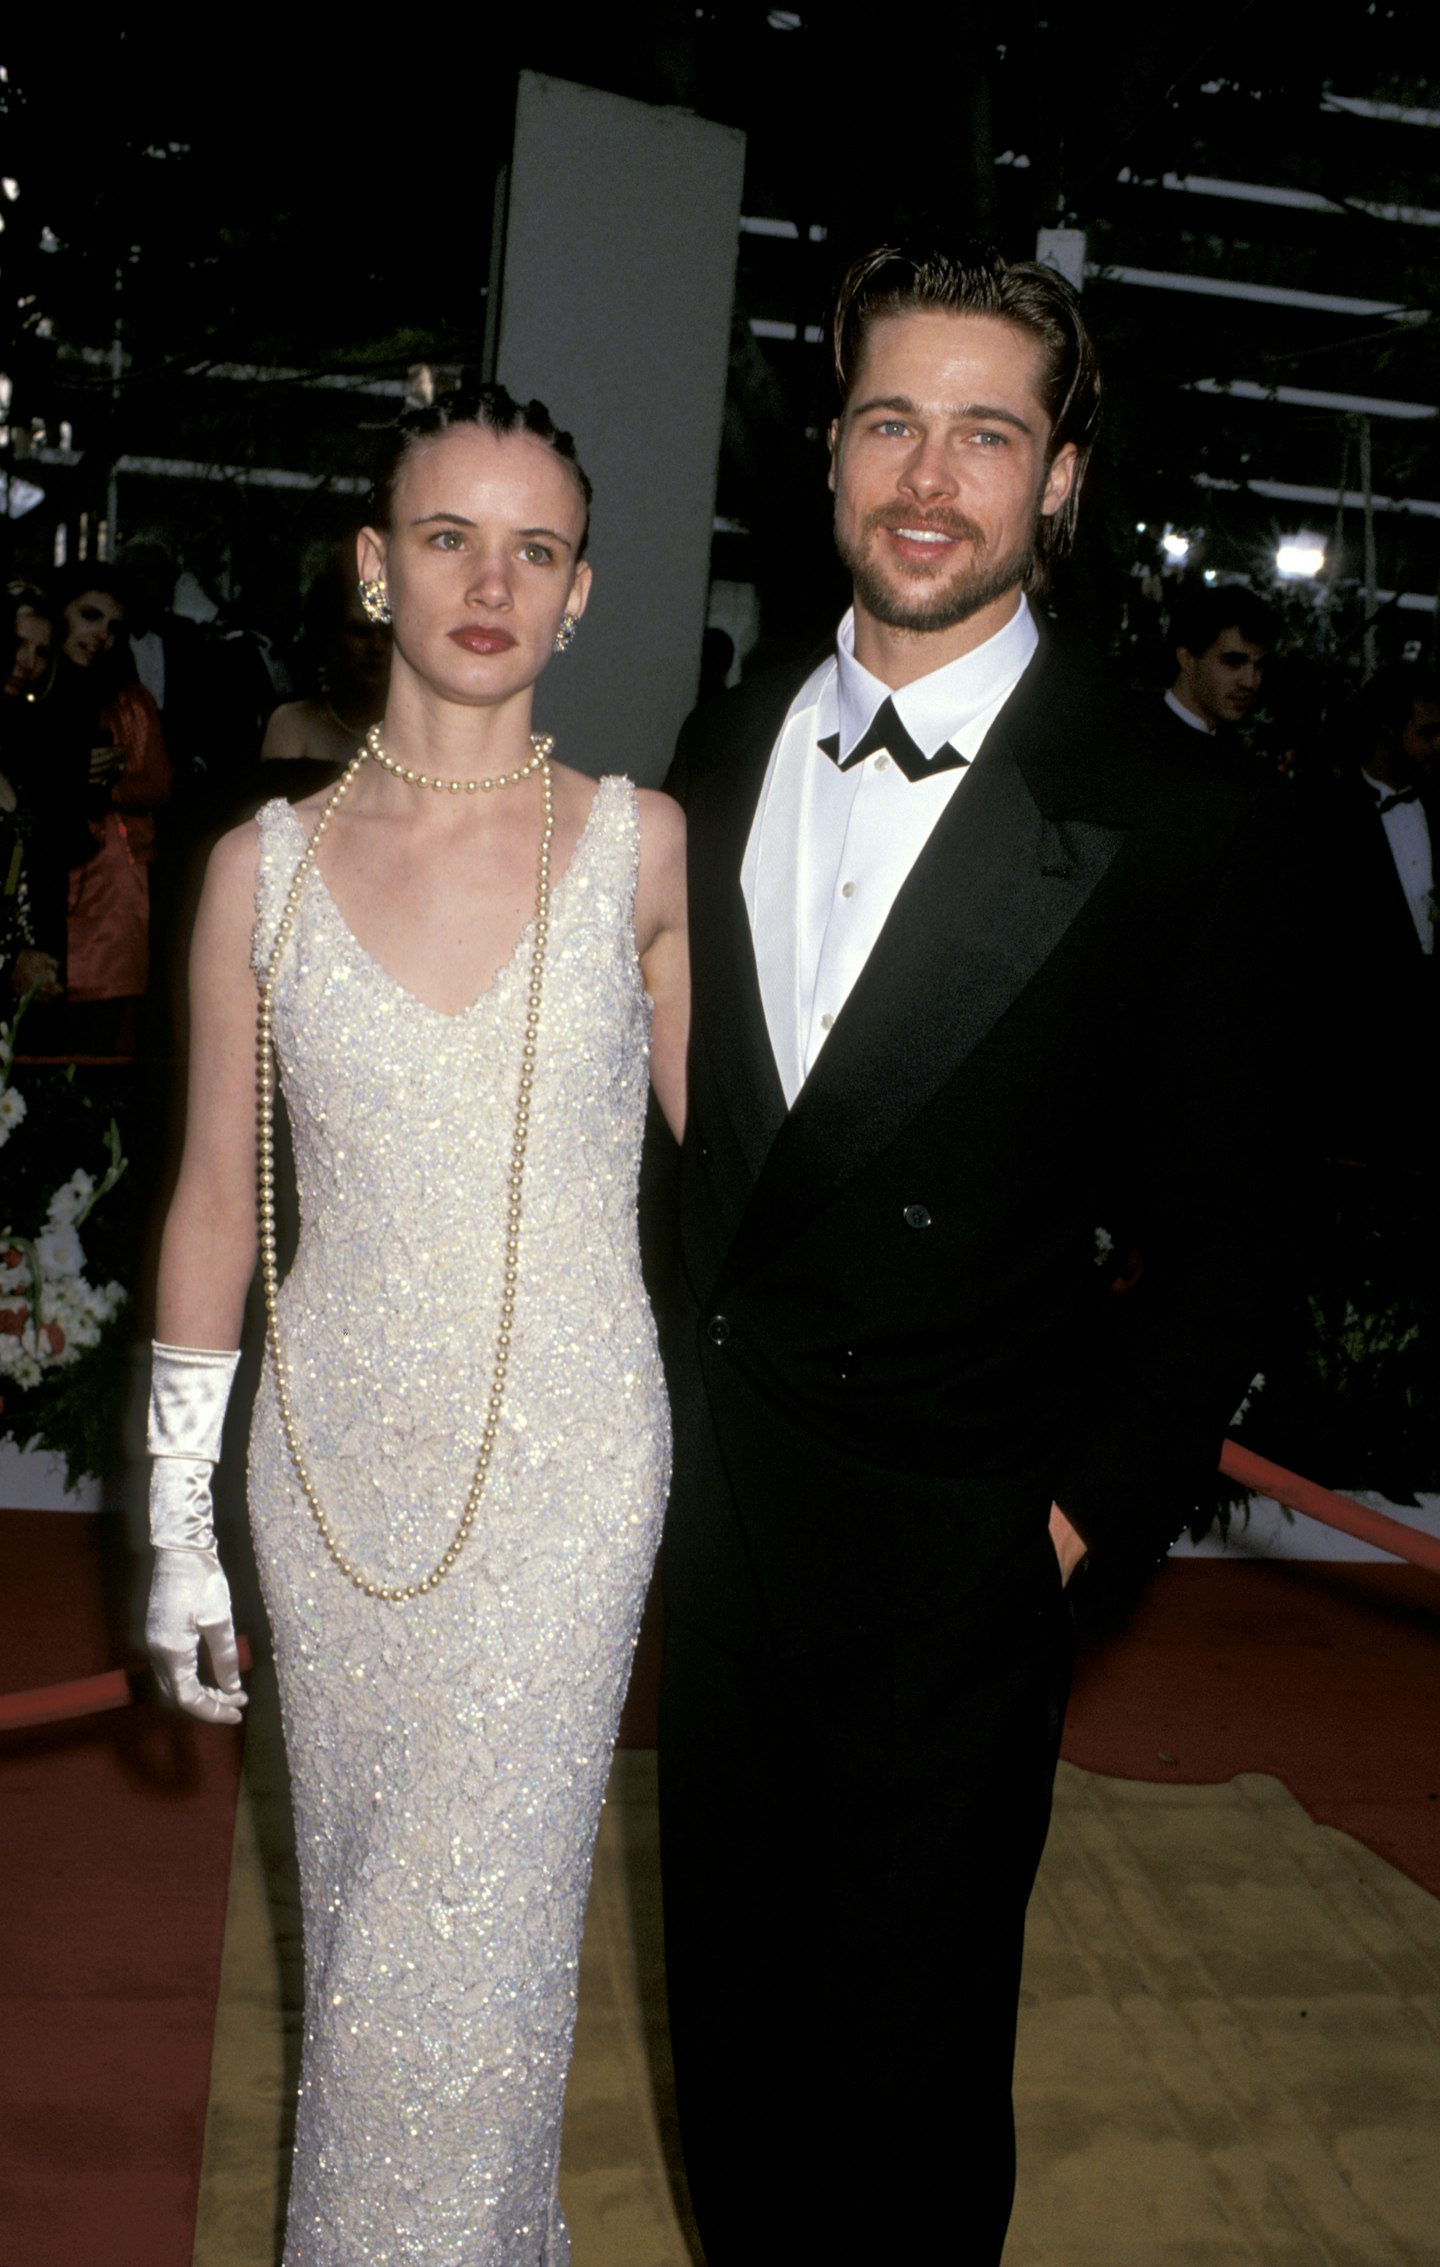 90s Oscars Fashion Dresses That Prove The 90u2019s Was The Wildest Decade For Oscars Fashion - Grazia (stacked)